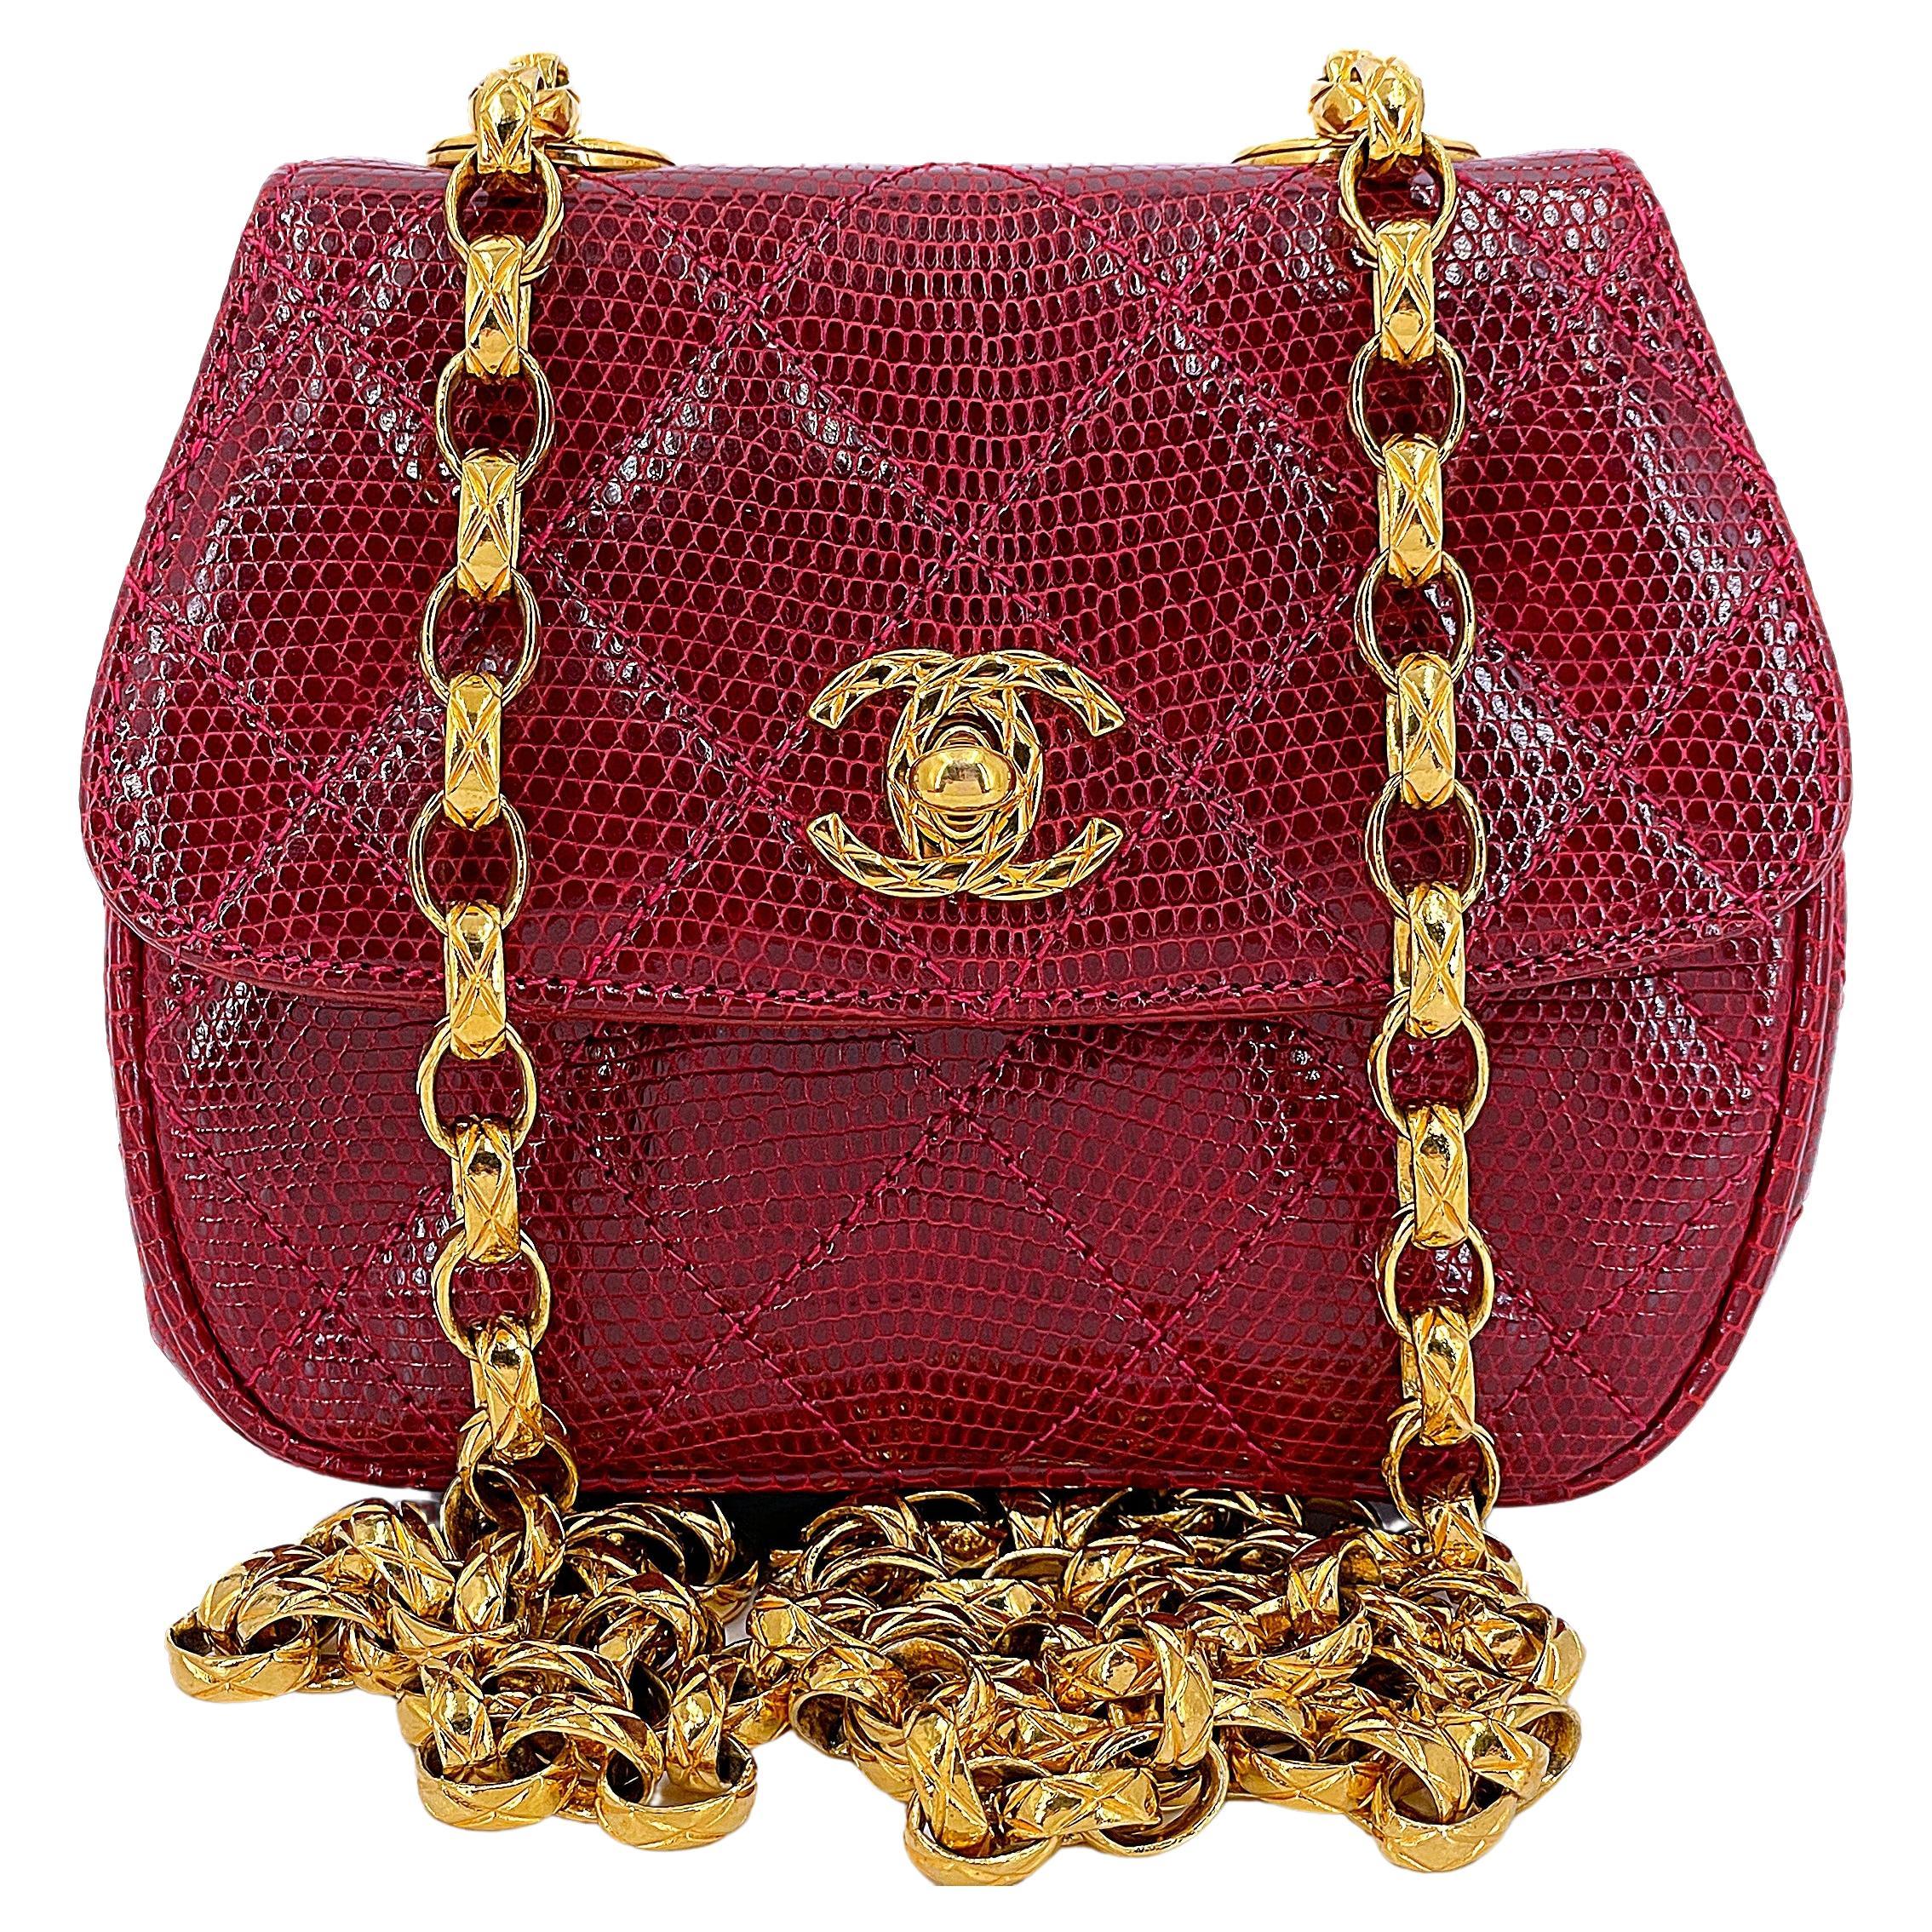 Rare Chanel 1980s Vintage Red Lizard Etched Chain Round Mini Flap Bag 67290 For Sale